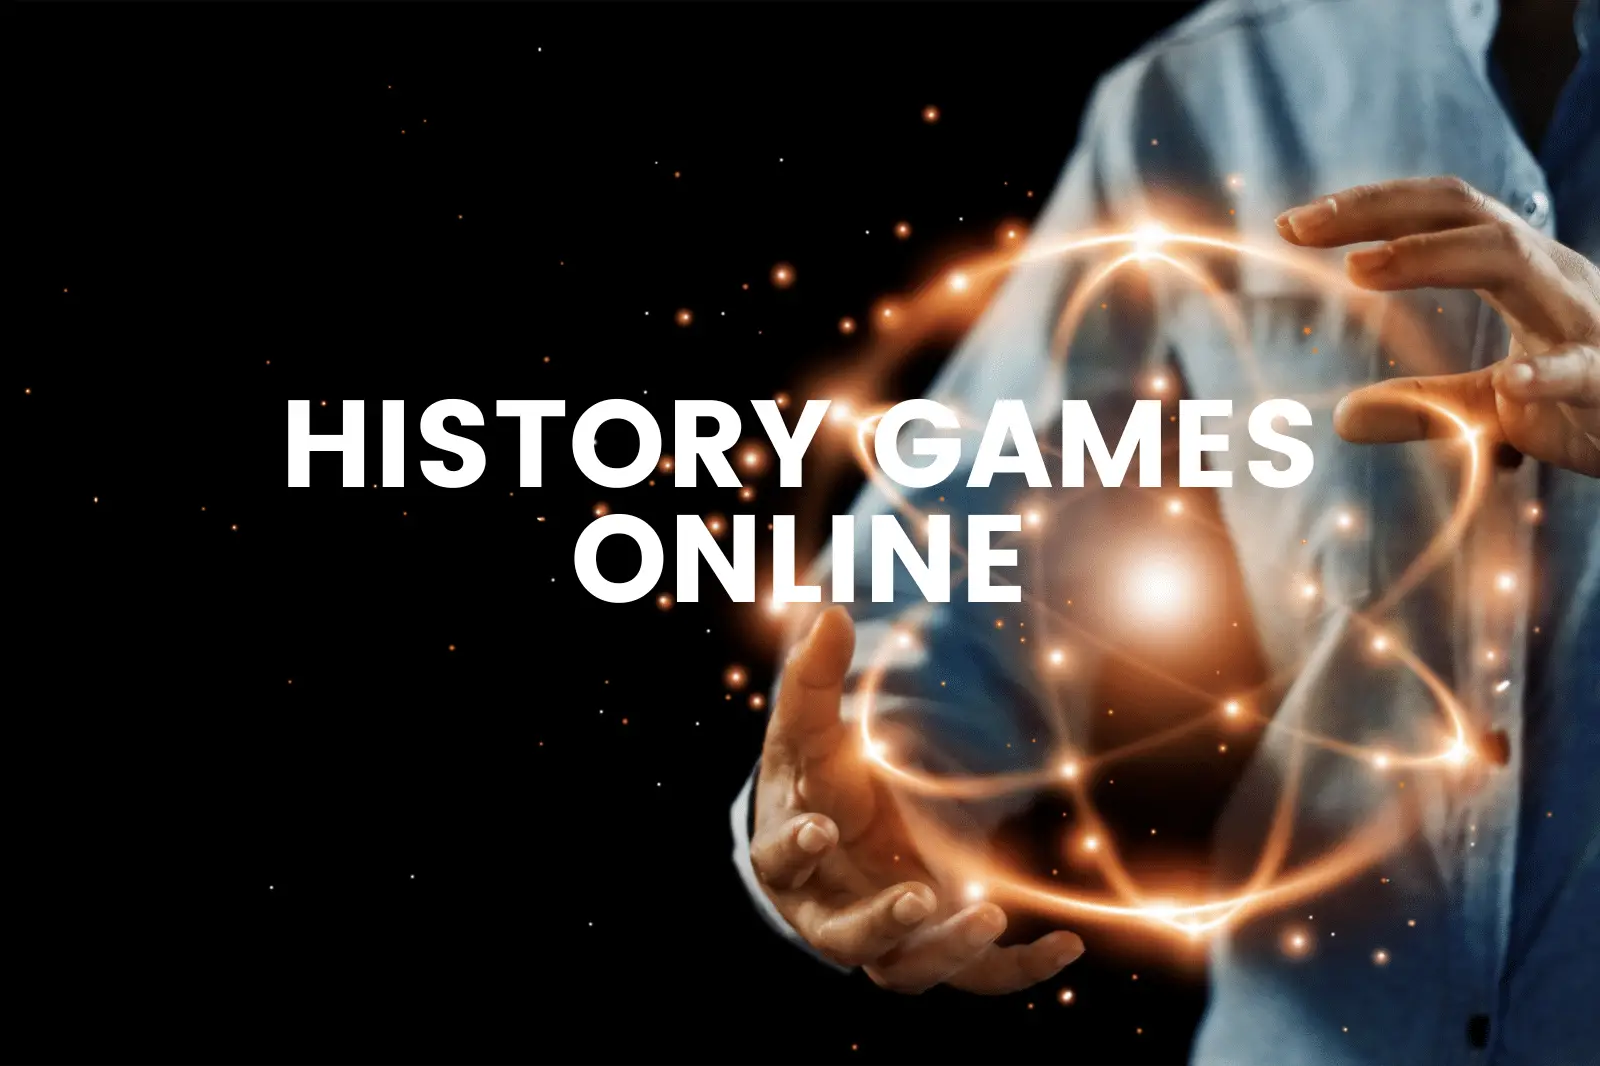 The 10 Best History Games Online